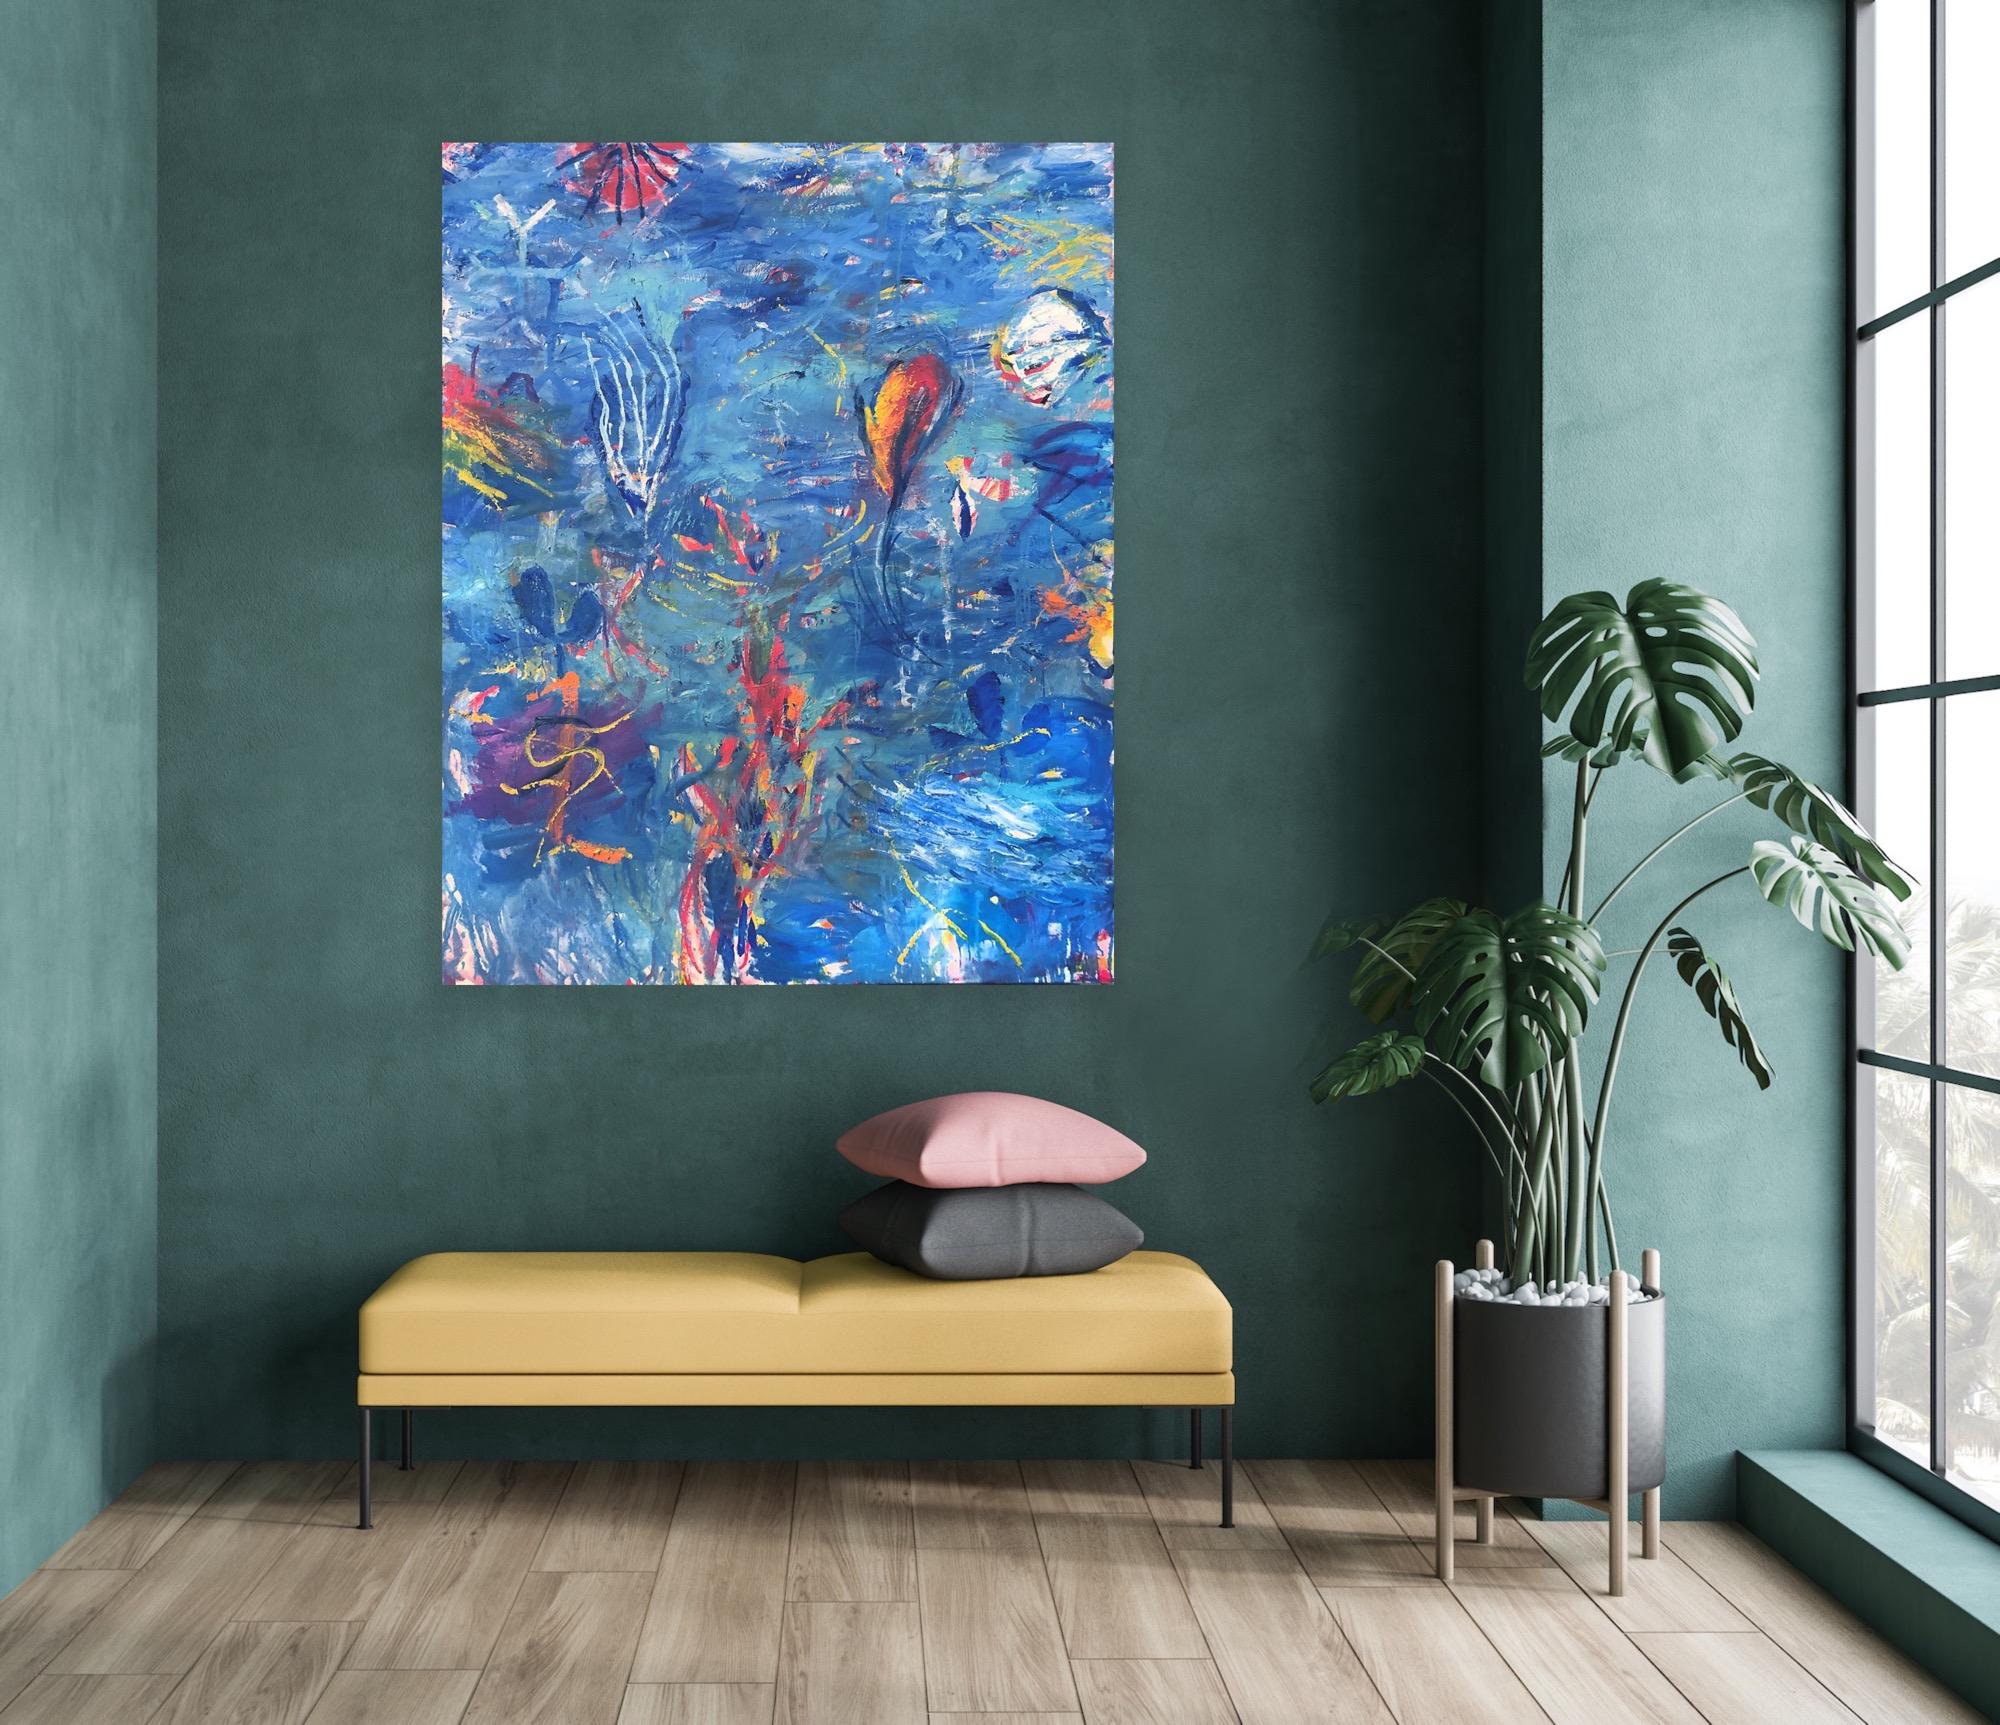 Blue Storm - Neo-Expressionist Painting by Ford Crull